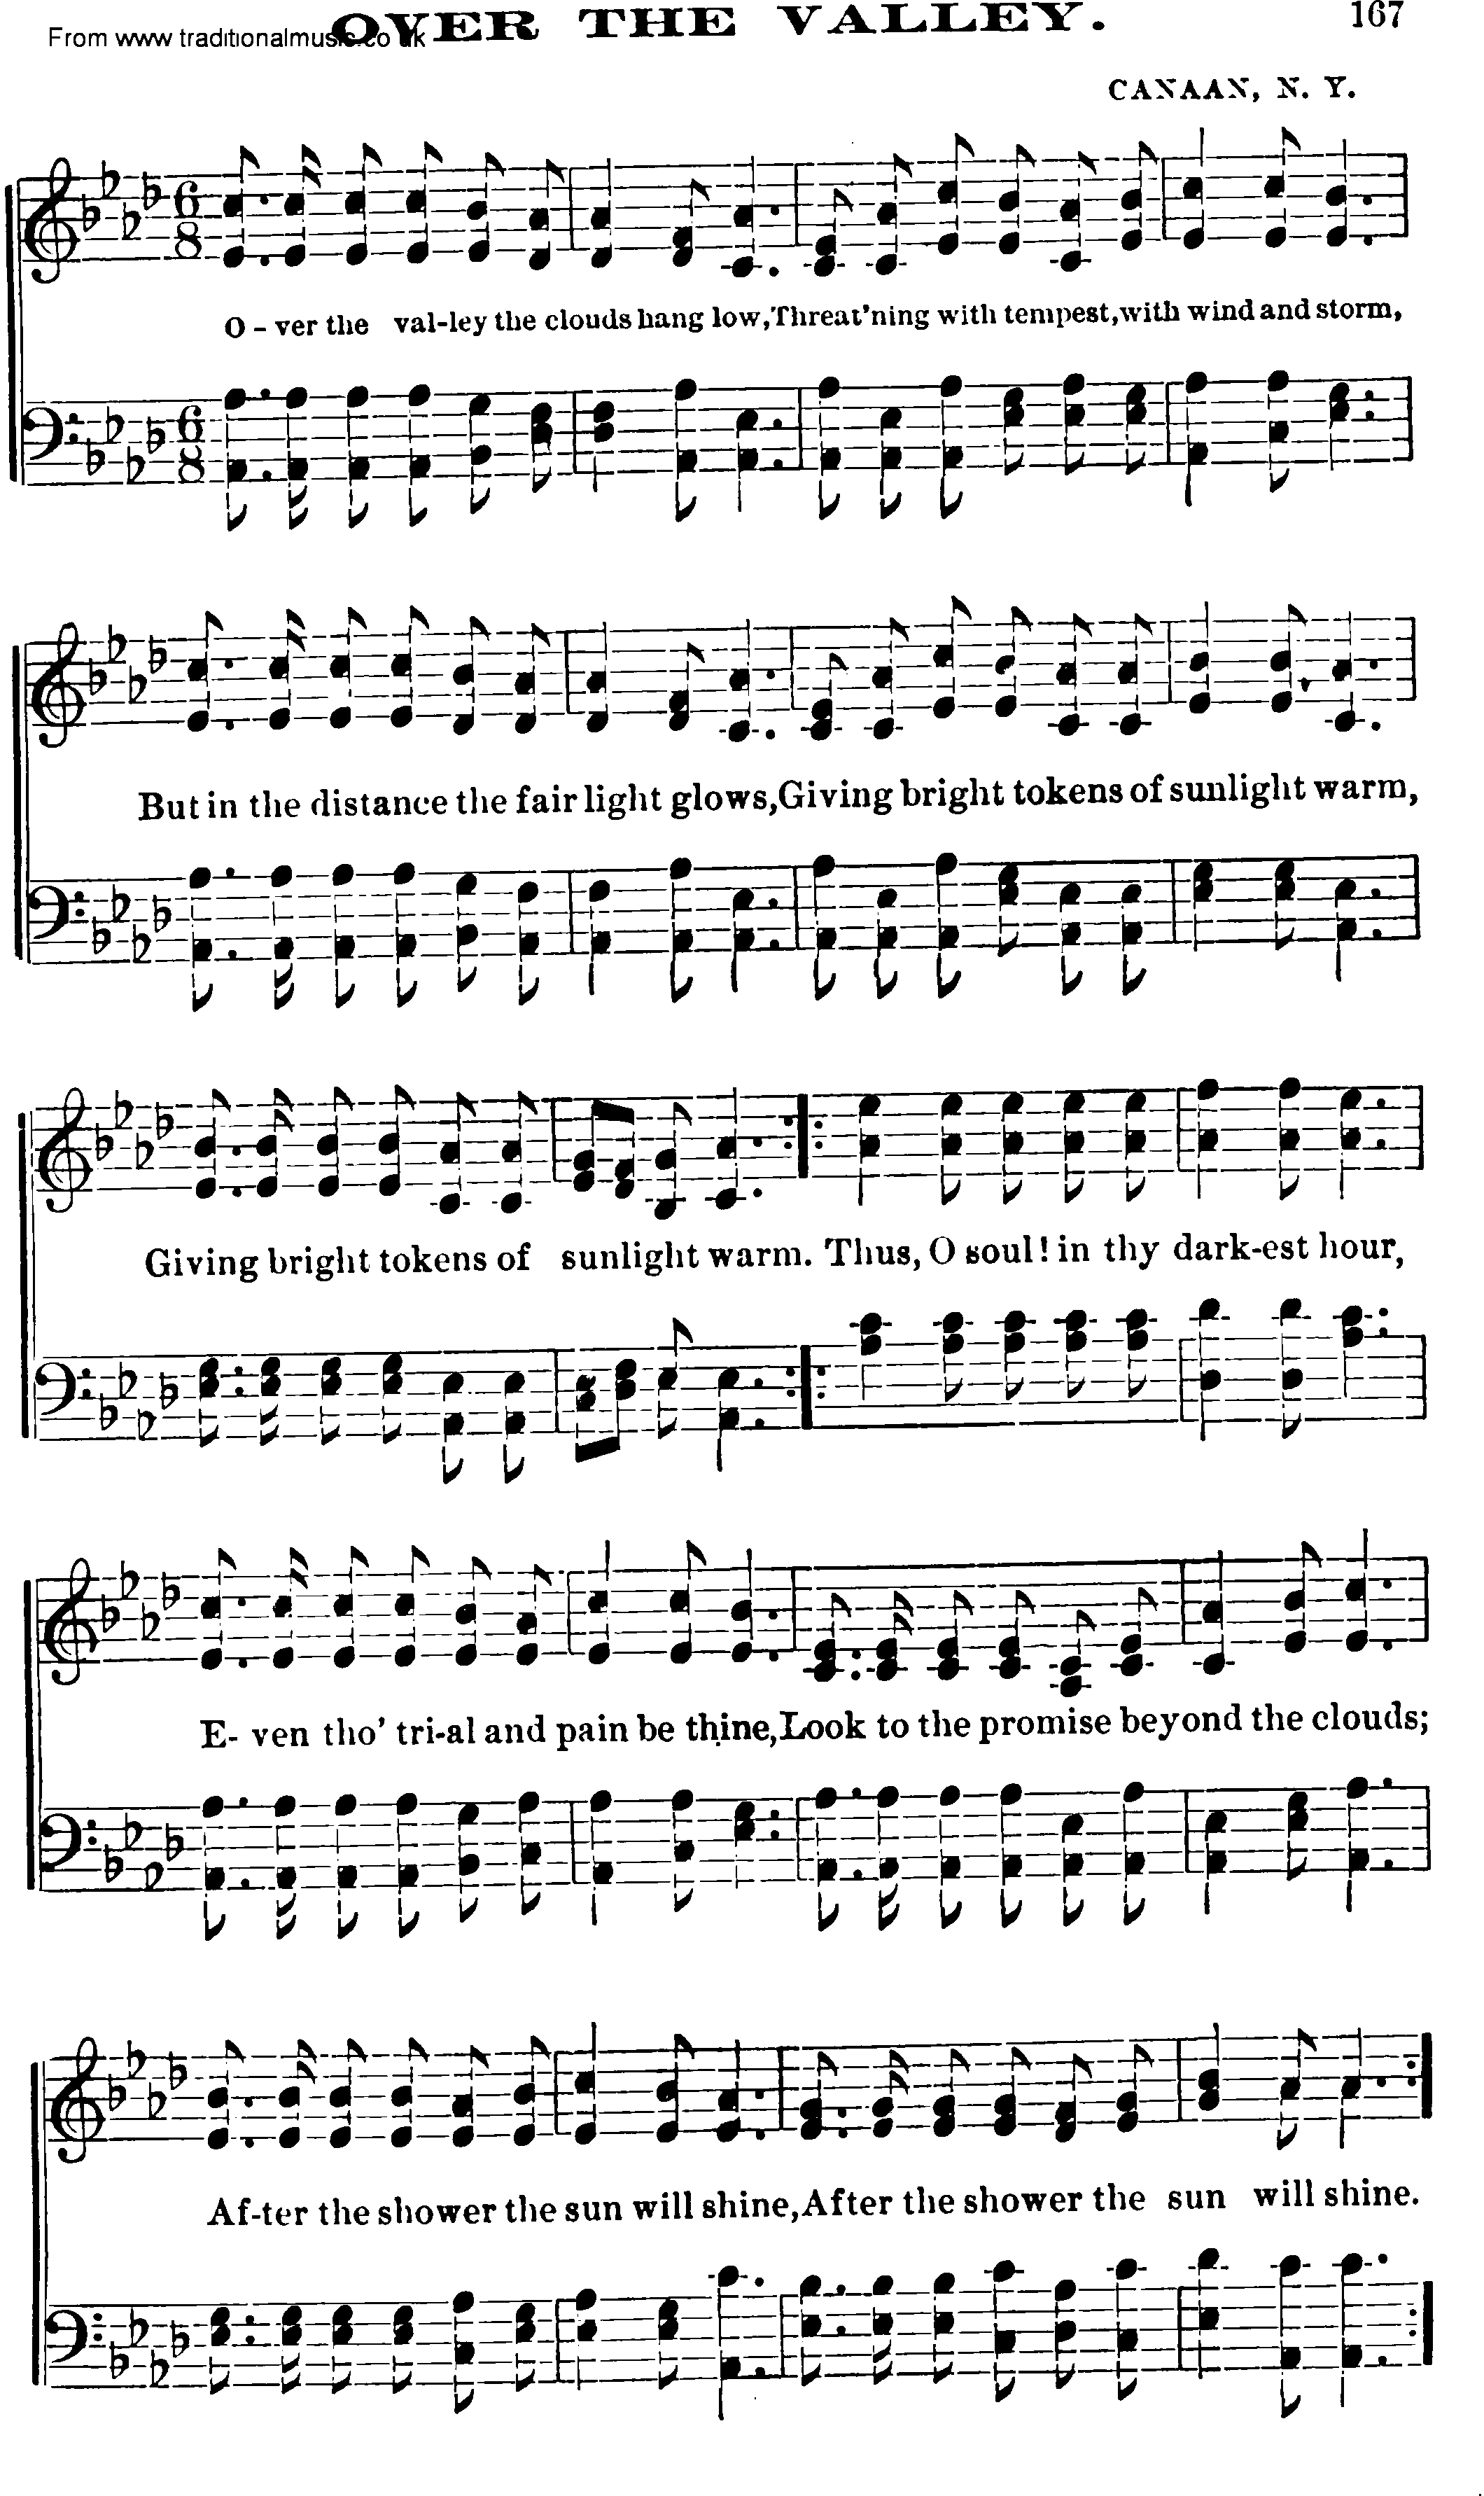 Shaker Music collection, Hymn: Over The Valley, sheetmusic and PDF